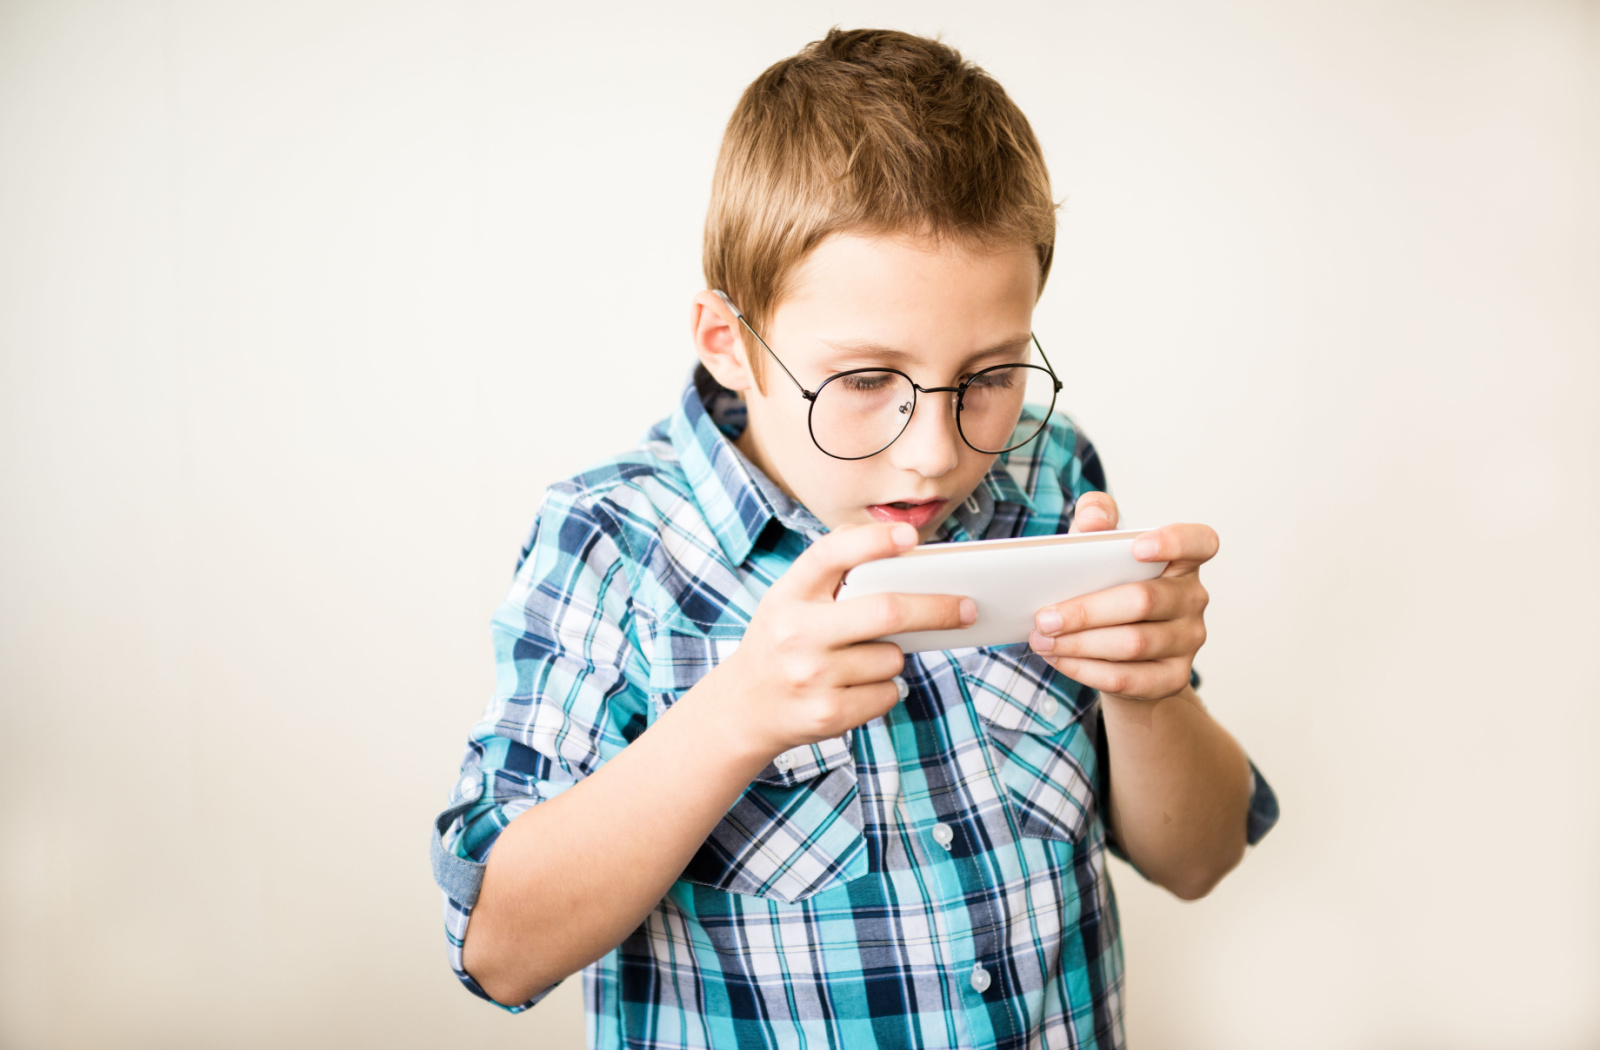 A child with large round glasses, standing and holding a smartphone very close to his face